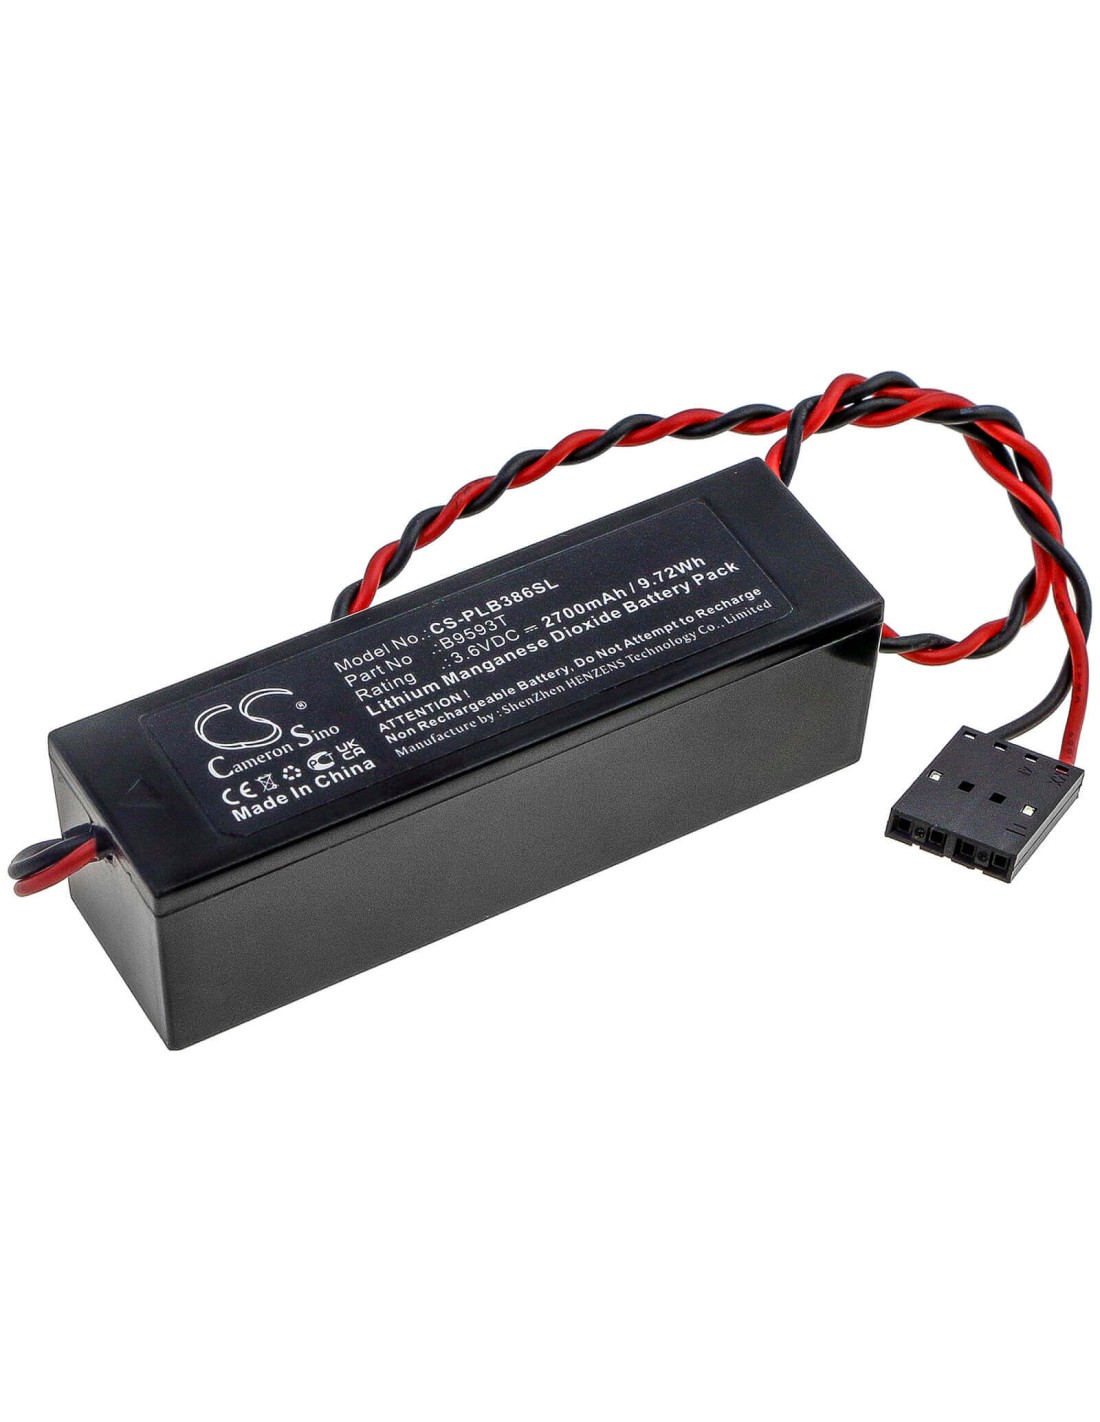 Battery for Epic Systems, Ep5242w, Ltc16pfs8 3.6V, 2700mAh - 9.72Wh